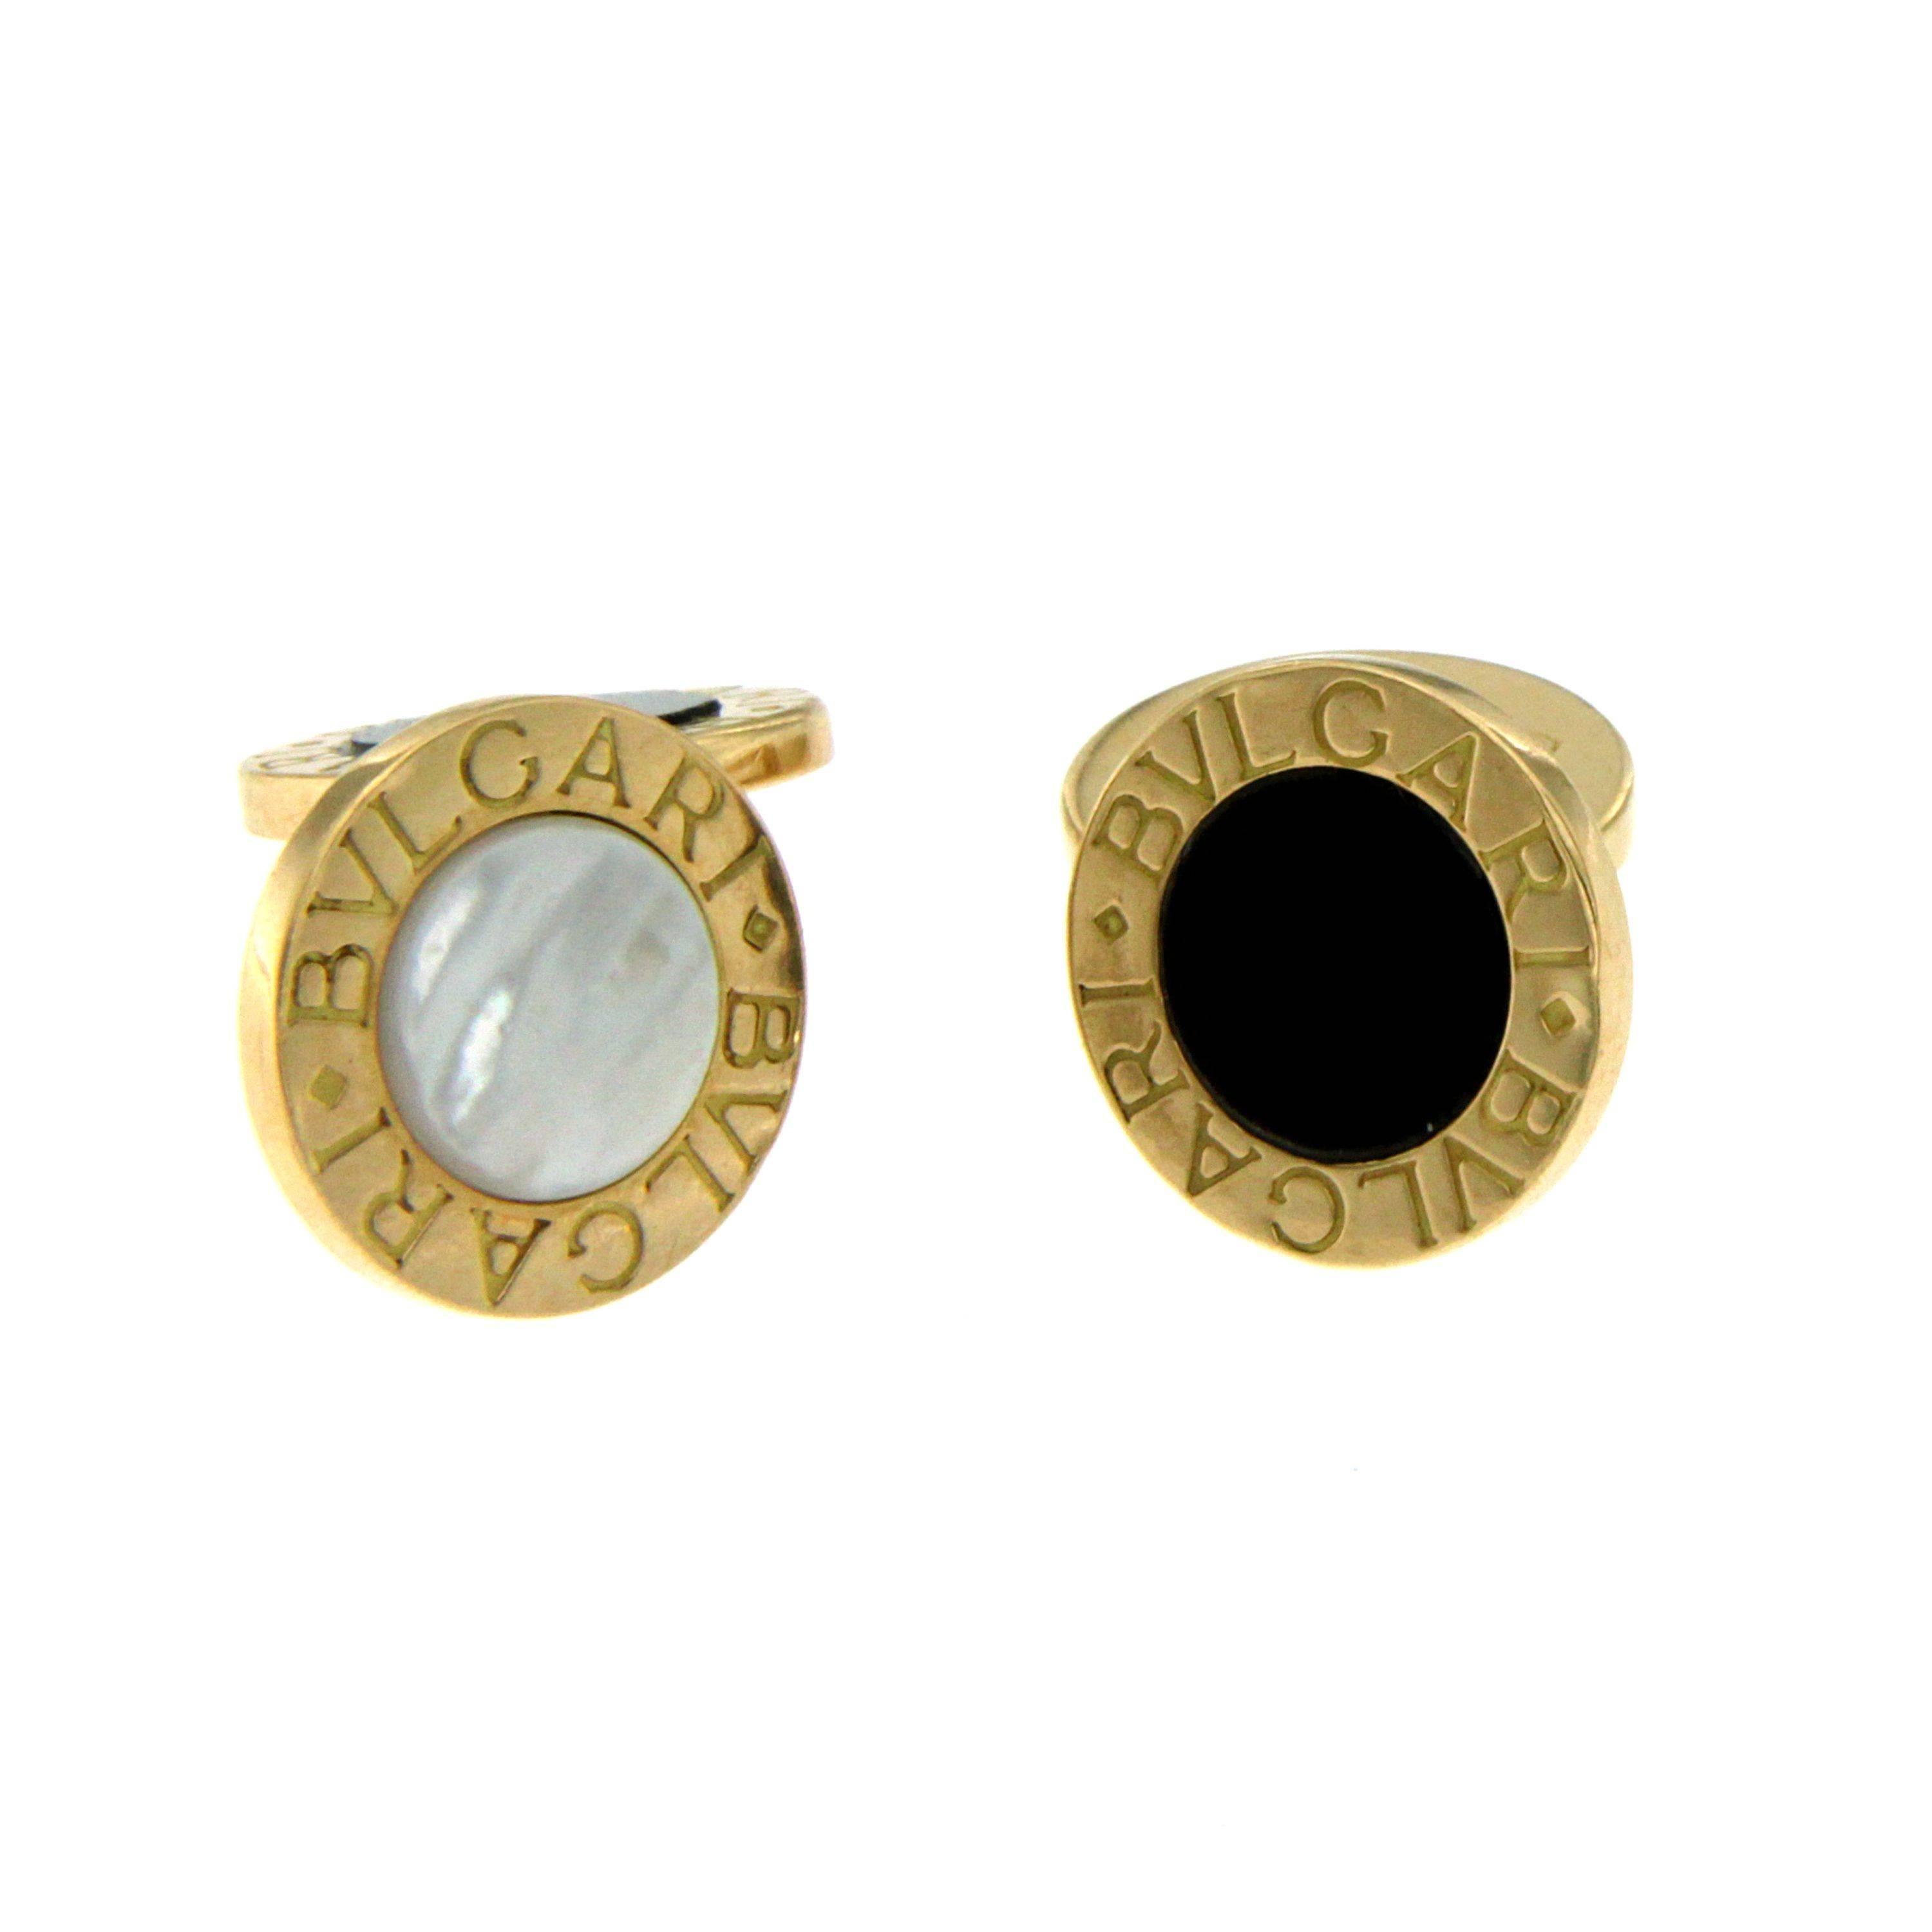 18k Yellow Gold Mother Of Pearl and Black Cufflinks by Bulgari. 
With 2 round mother of pearl stones and 2 Black Onyx stones

Measurements: diameter 1,3 cm (0.51 in)
Stamped Hallmarks: Bvlgari 750 

CONDITION: Pre Owned - Good
METAL: 18k yellow Gold